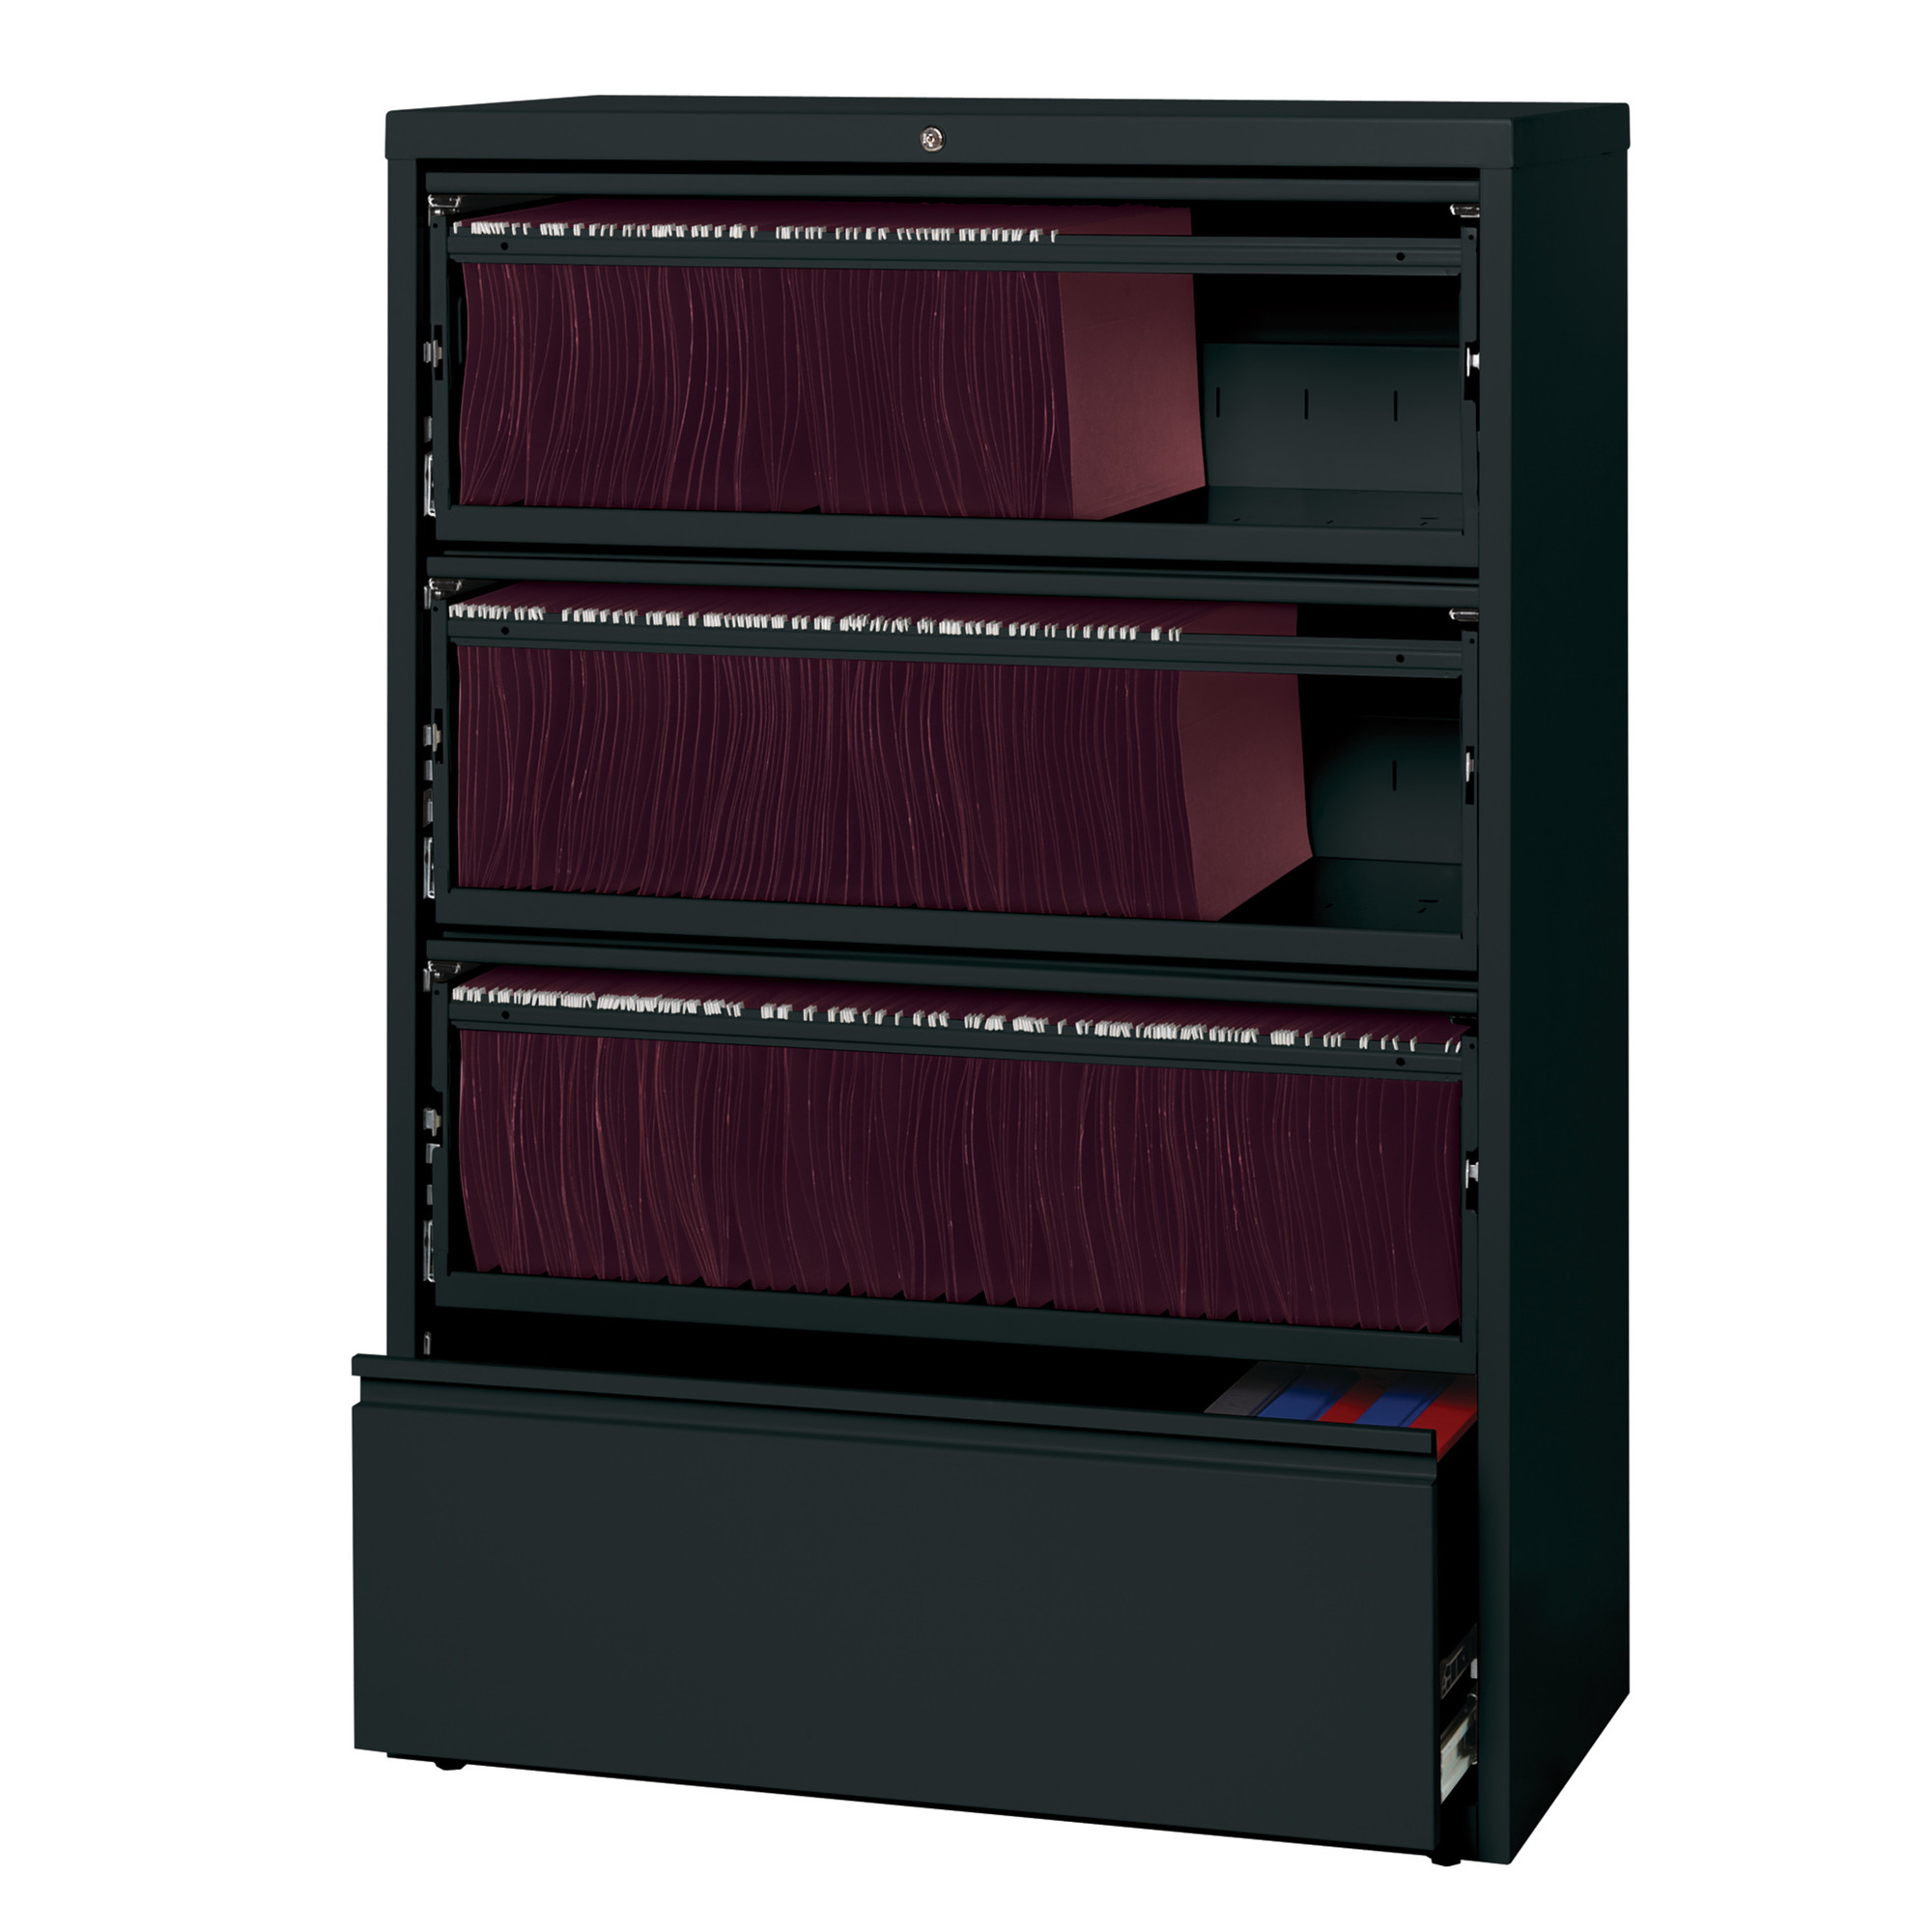 4 Drawer Lateral File Cabinet, Width 36 in, Depth 18.625 in, Height 52.5 in, Model - Hirsh Industries 17899